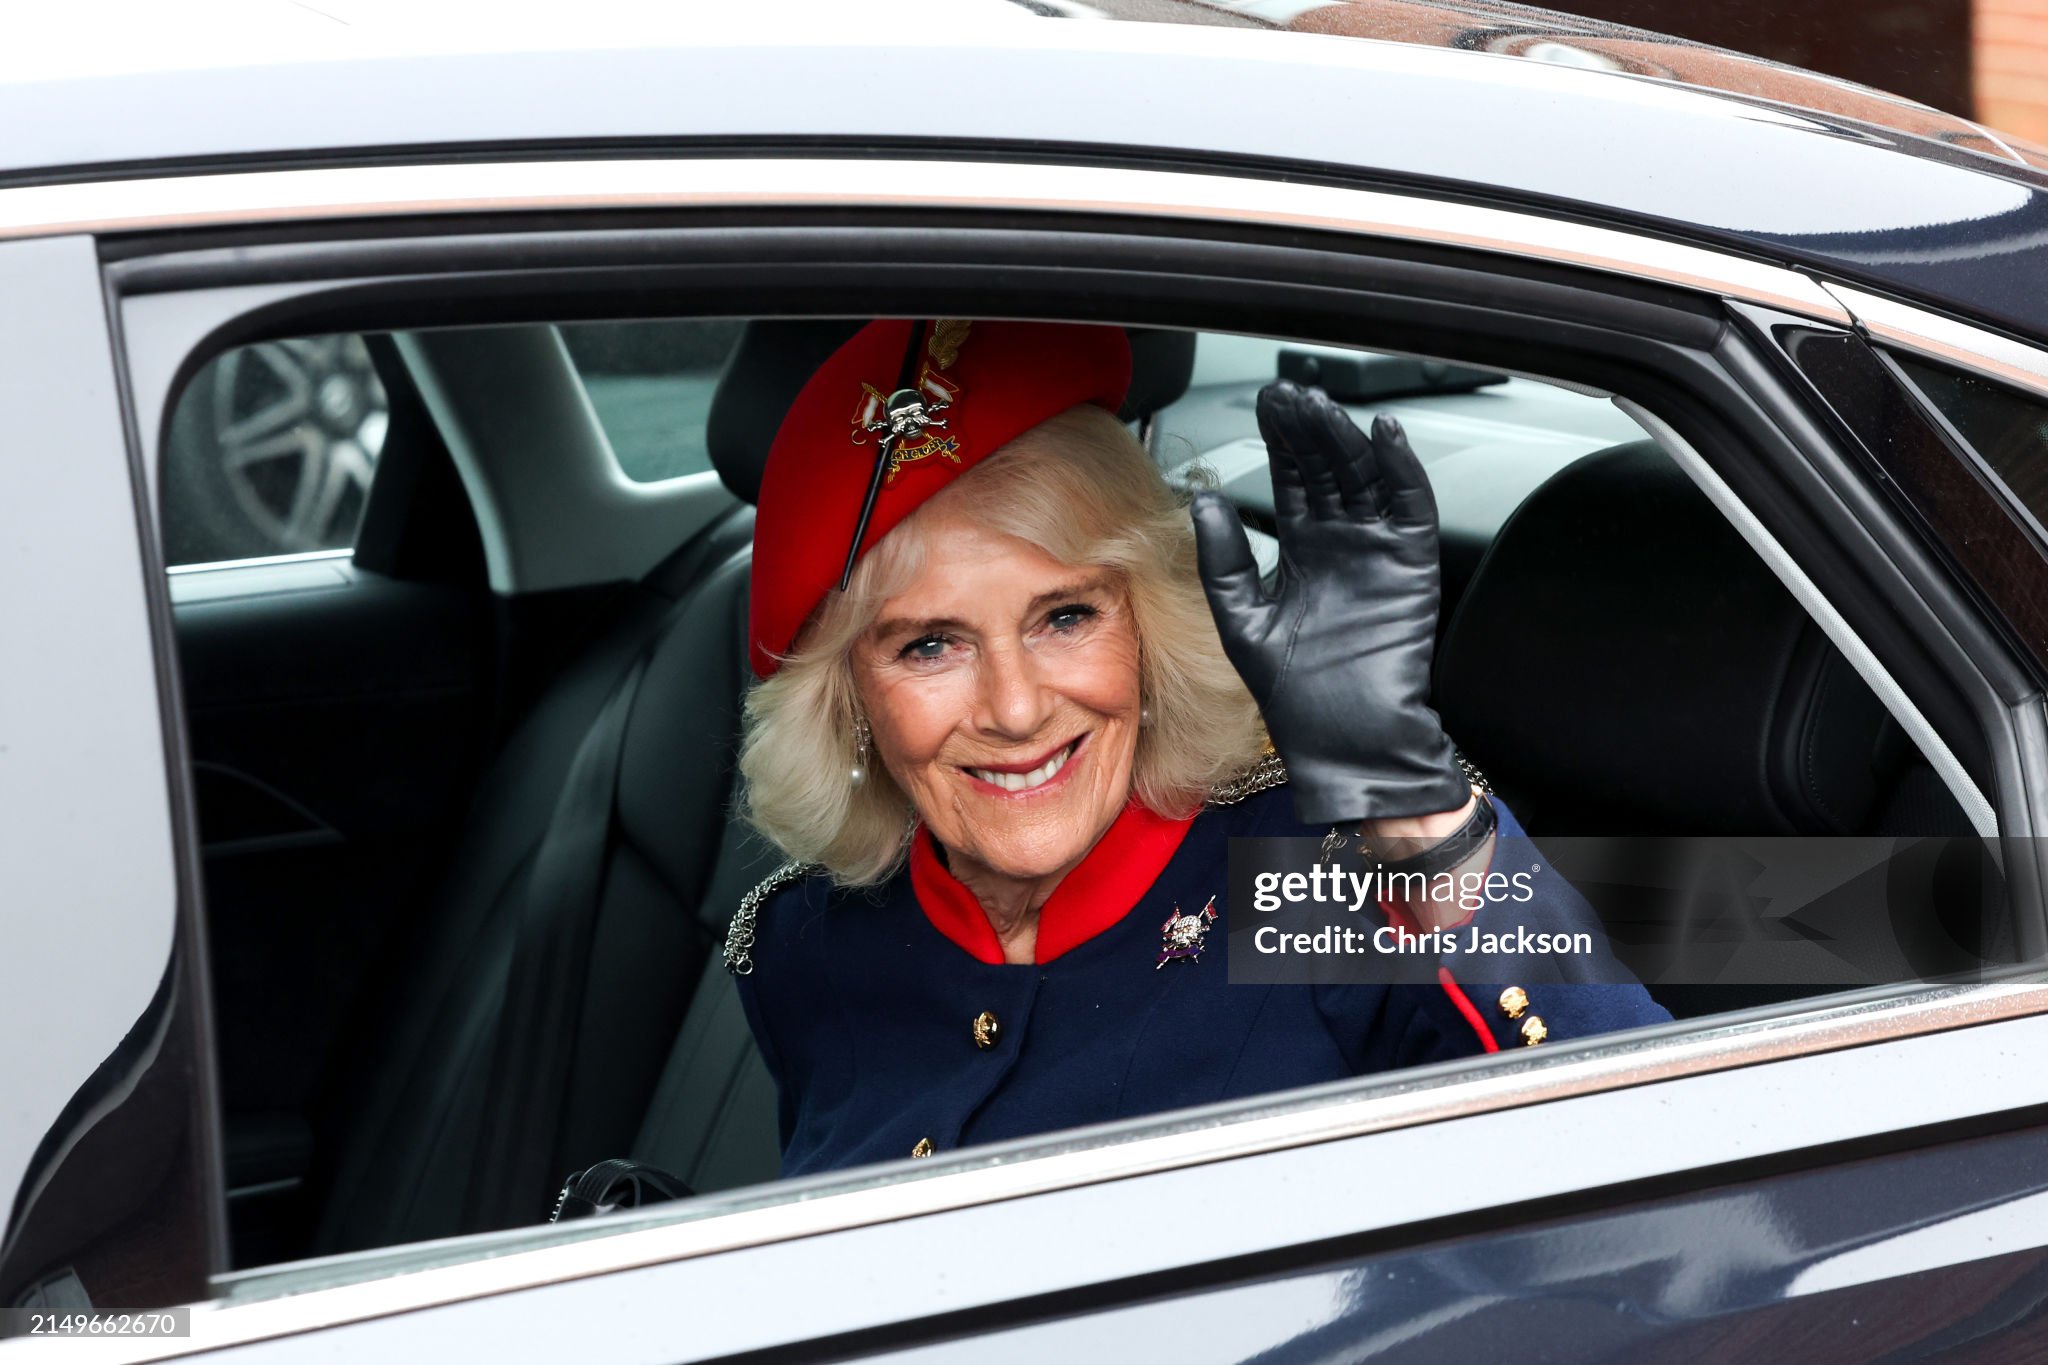 queen-camilla-visits-the-royal-lancers-in-north-yorkshire.jpg?s=2048x2048&w=gi&k=20&c=V_munvGyNvDMDToCdcZxBbdE455pXLEwmf40arQ-M5I=